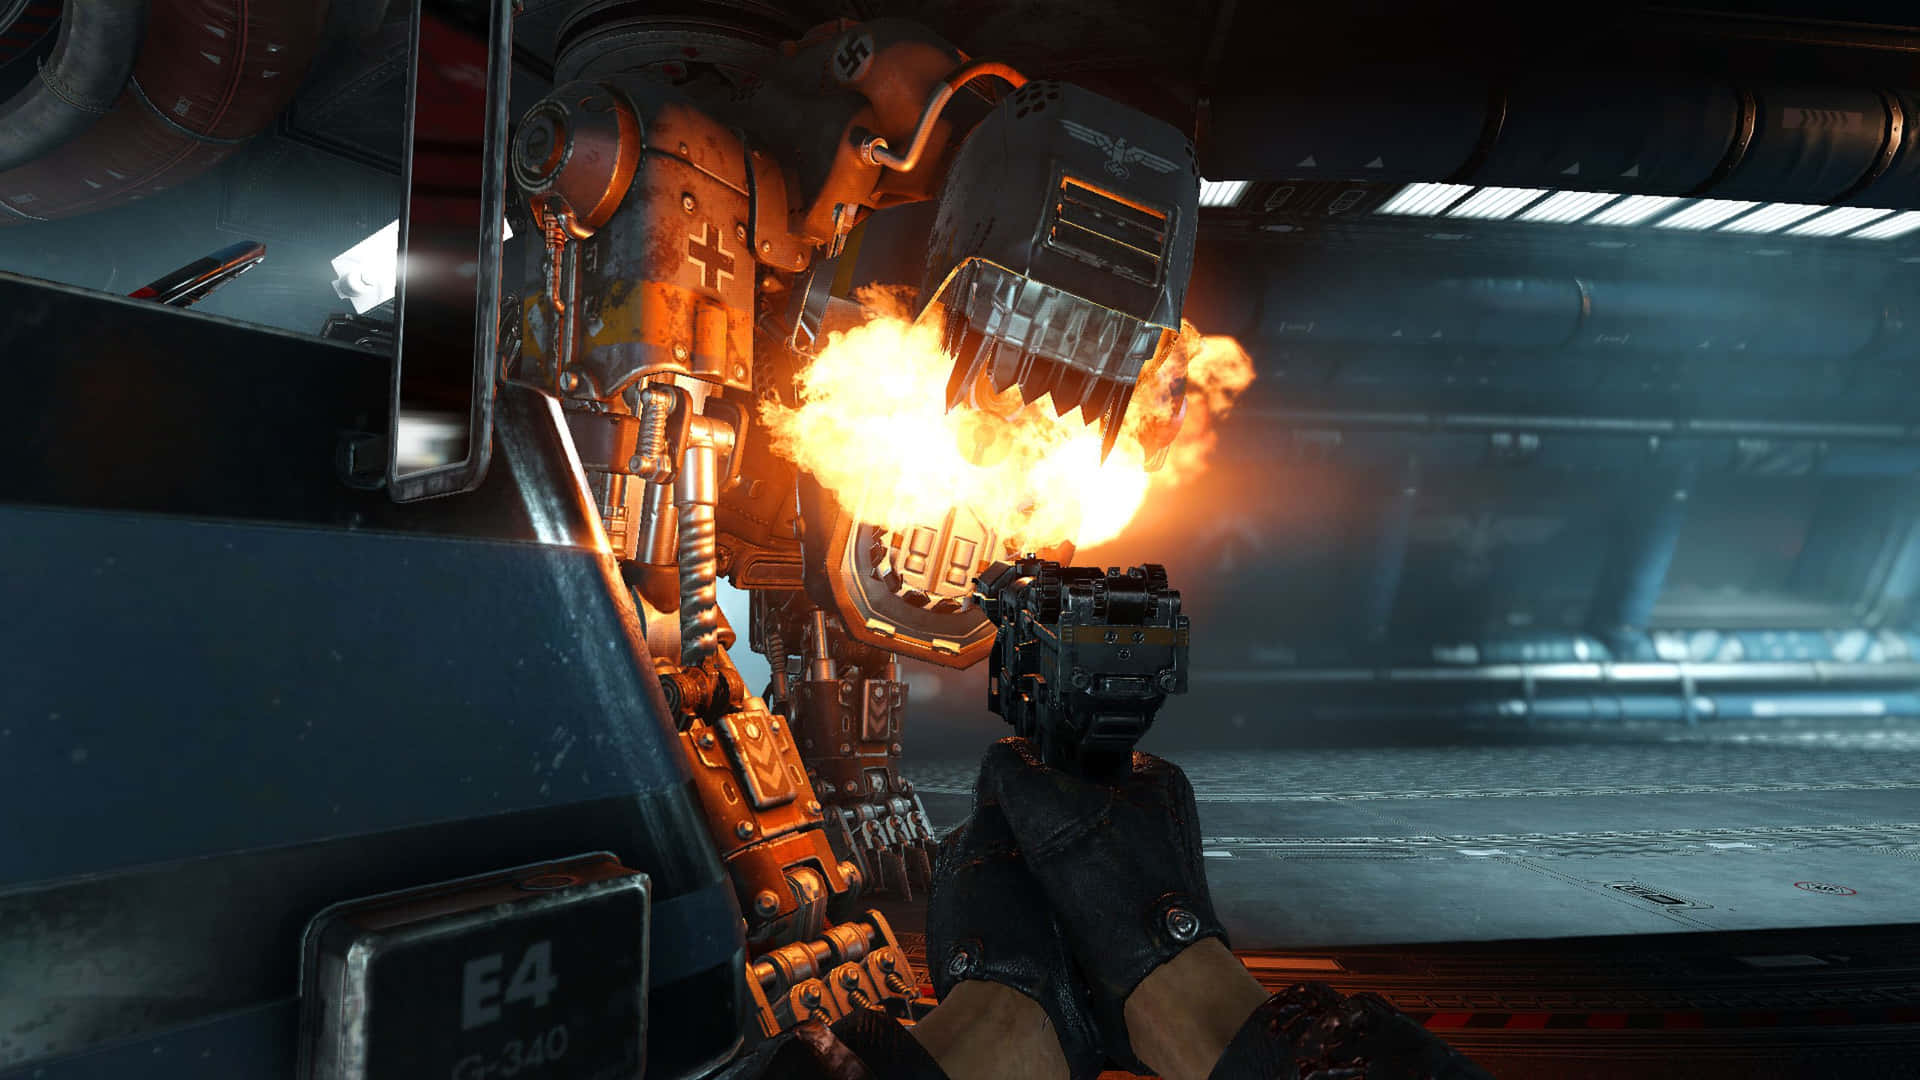 A warrior fights for freedom on the frontline in Wolfenstein II